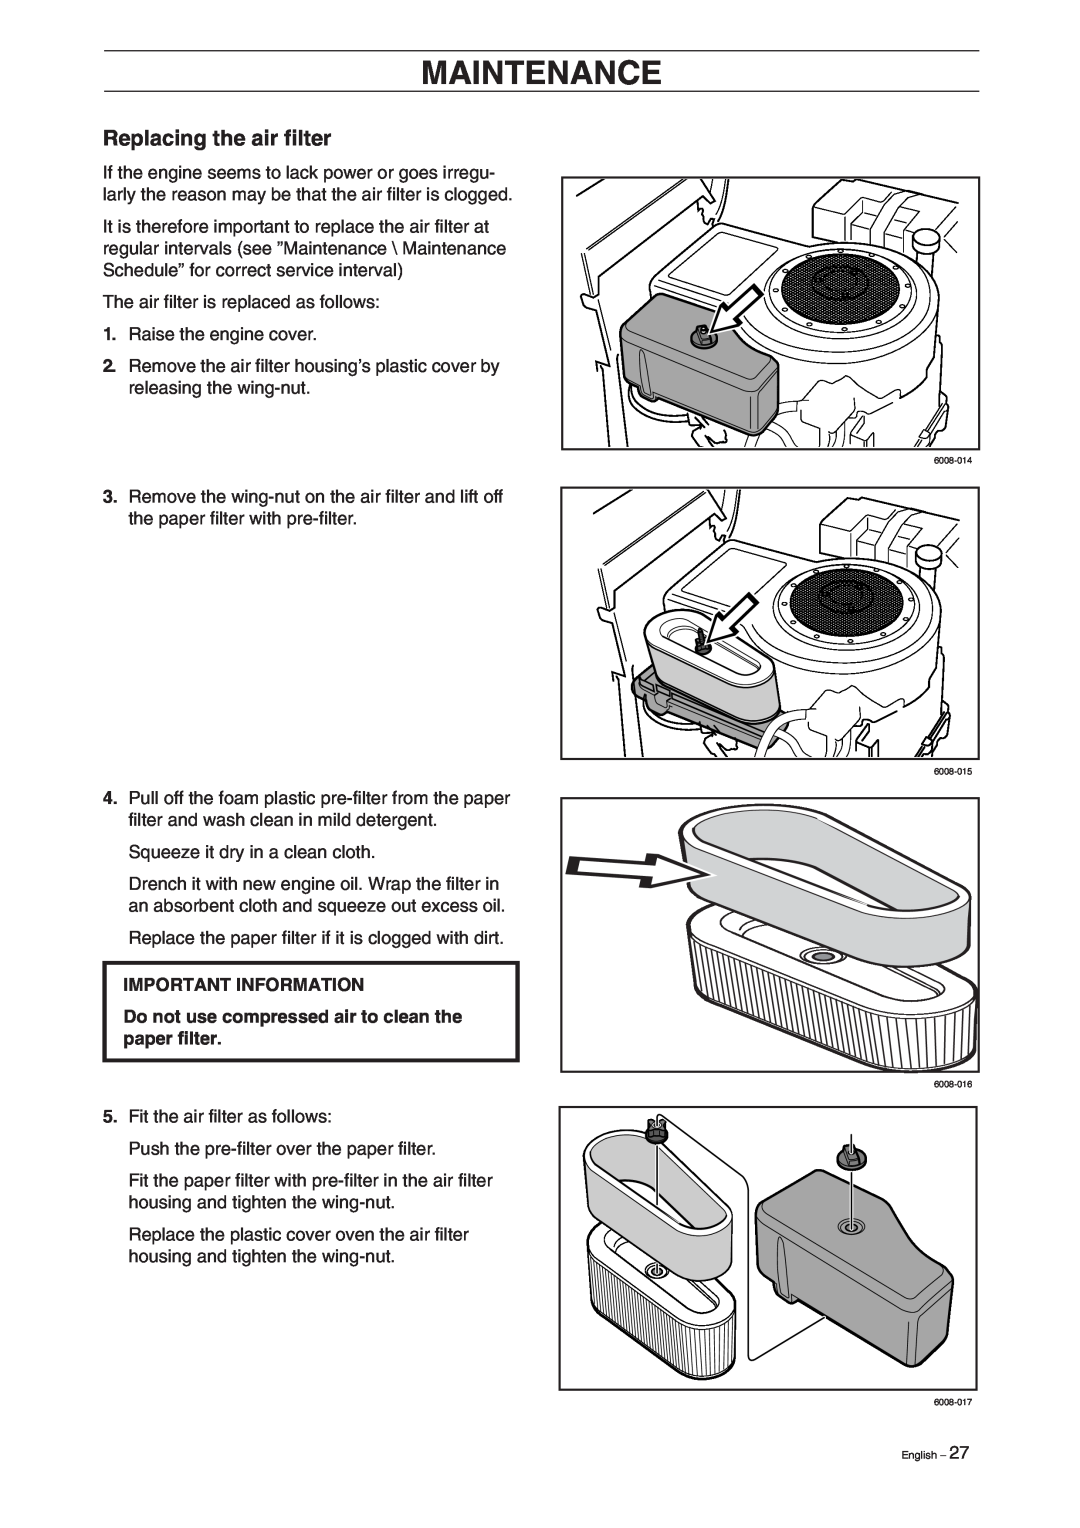 Husqvarna 13 manual Replacing the air filter, Do not use compressed air to clean the paper filter, Maintenance 